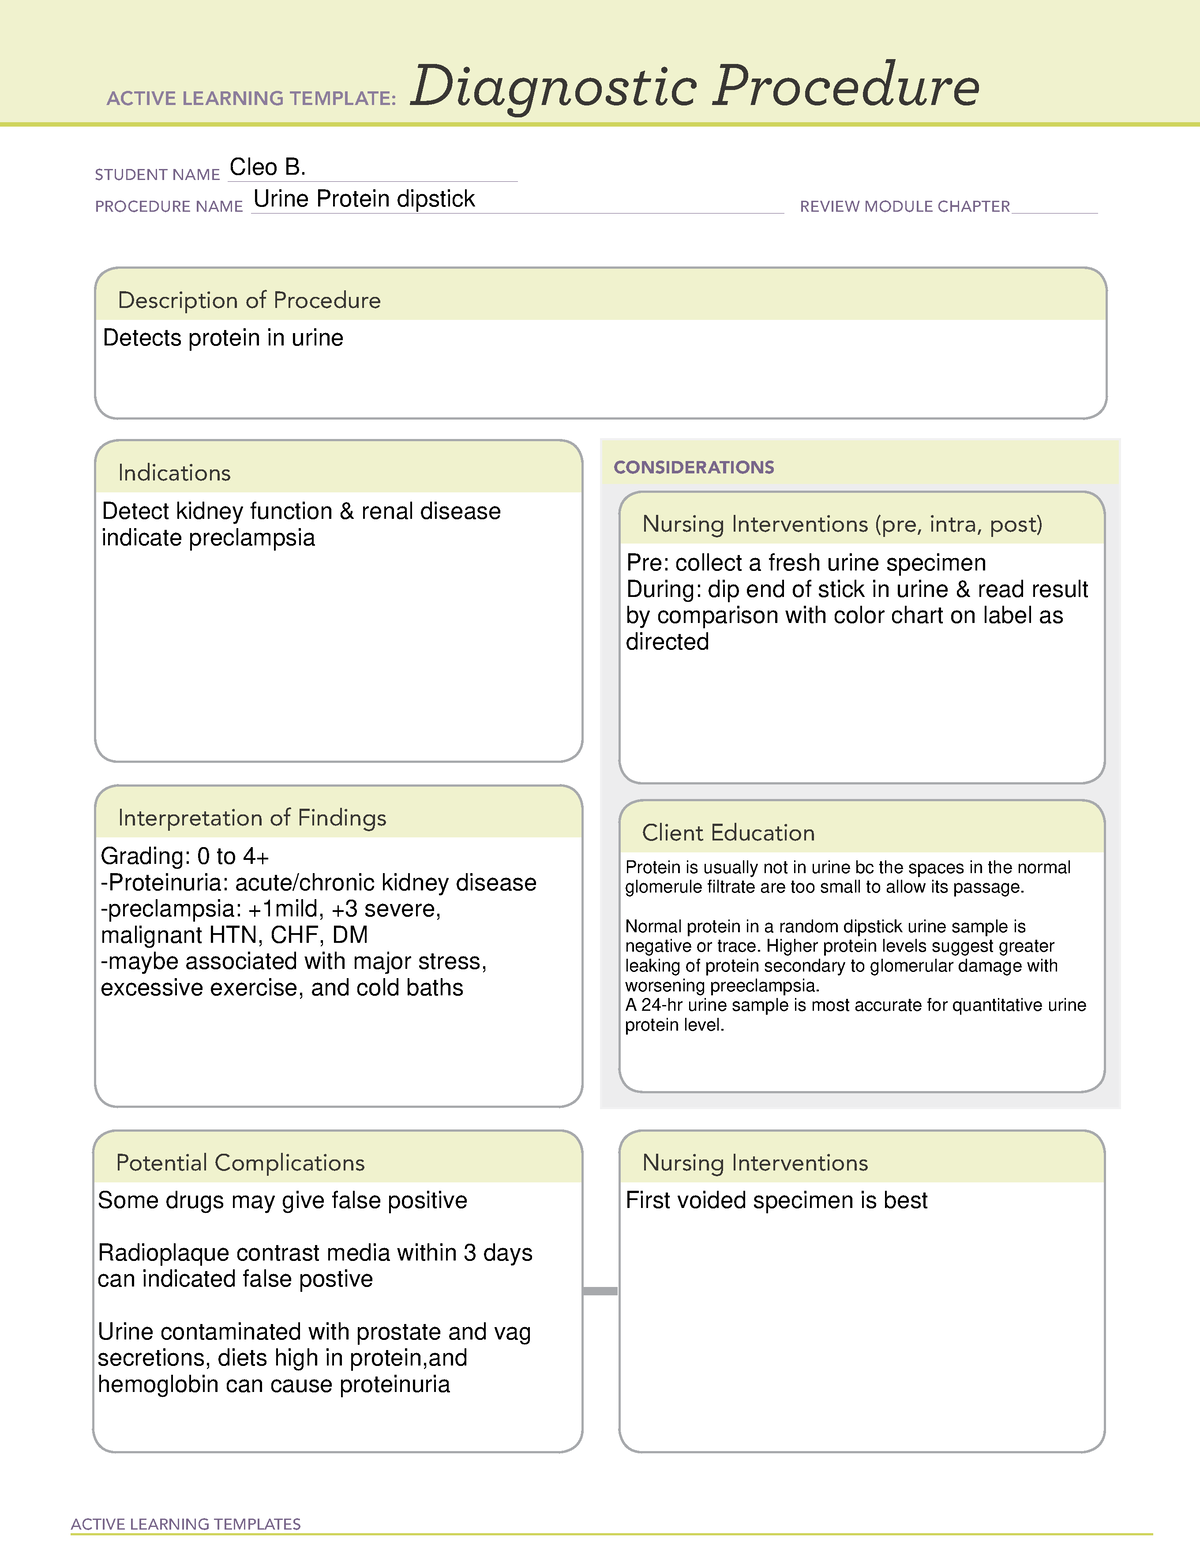 Active Learning Template Diagnostic Procedure Urinalysis